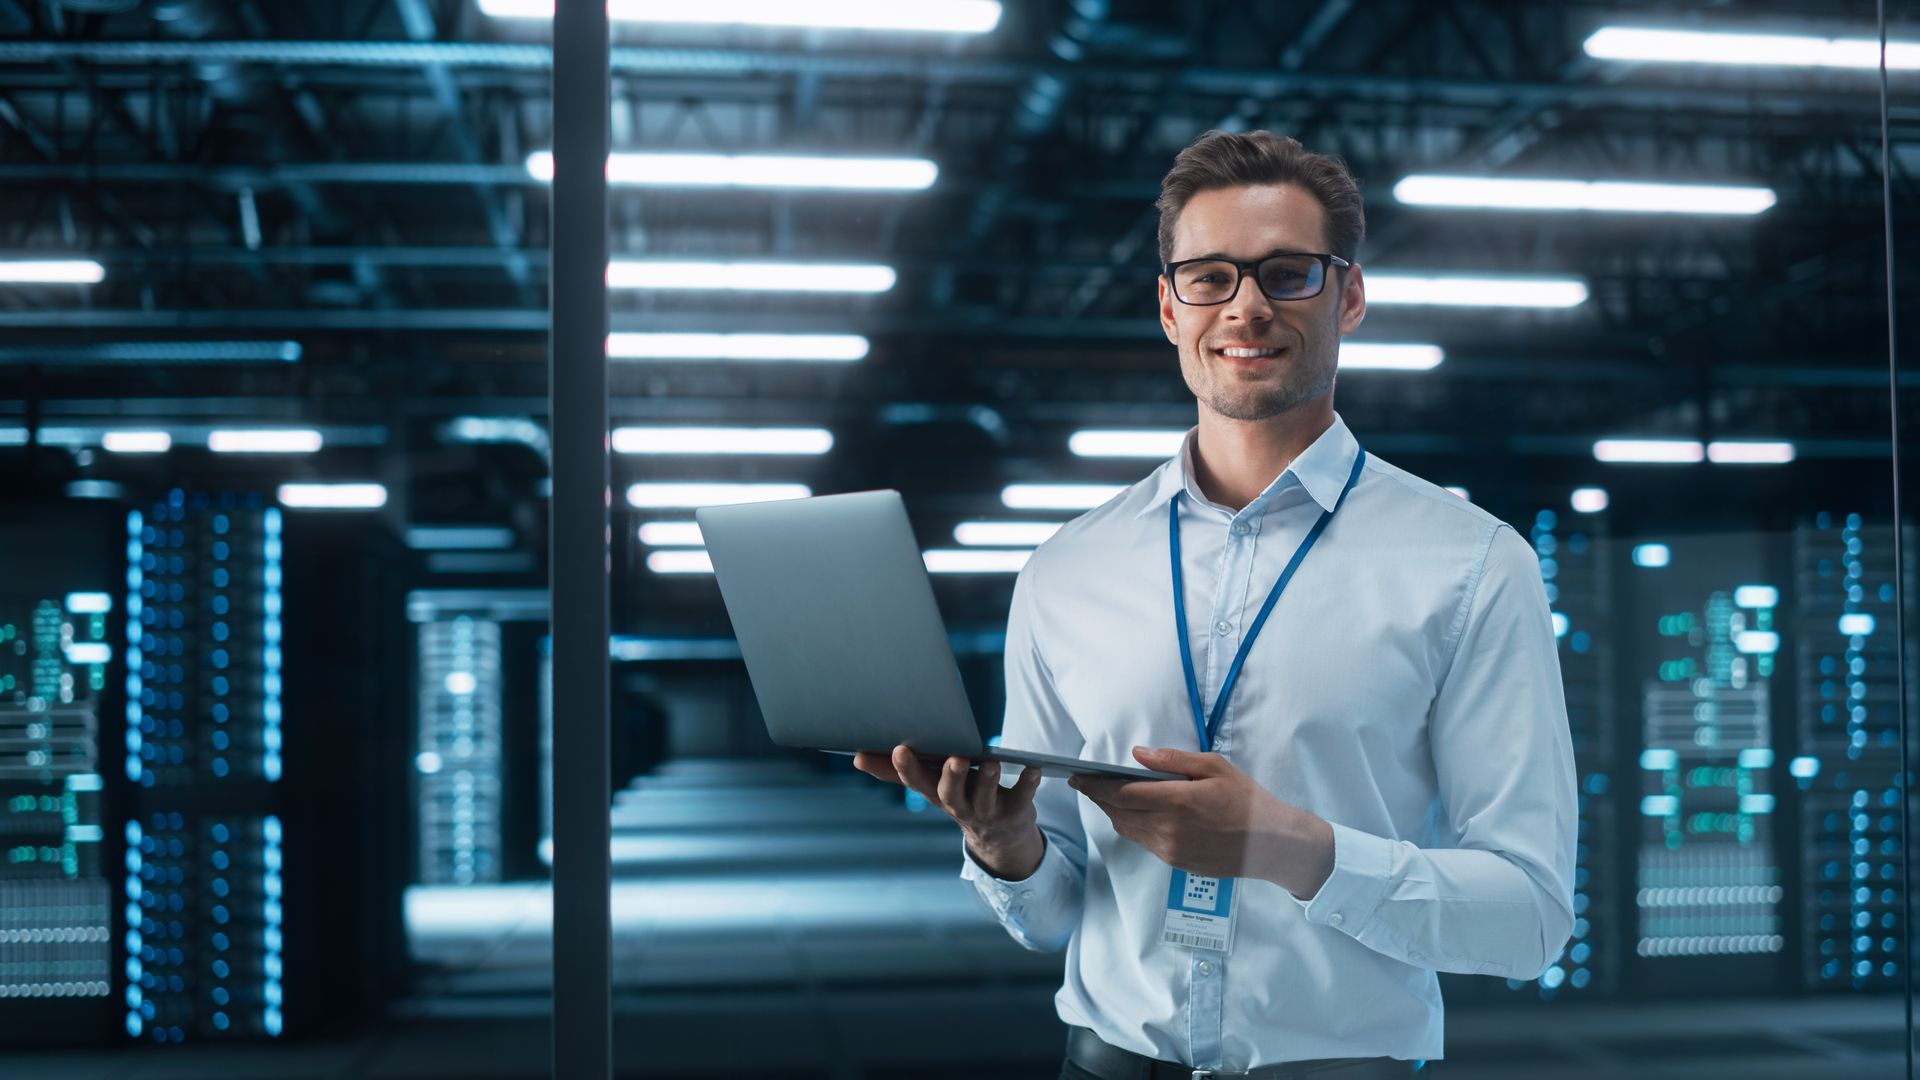 Smiling network administrator standing inside a data center and holding a laptop